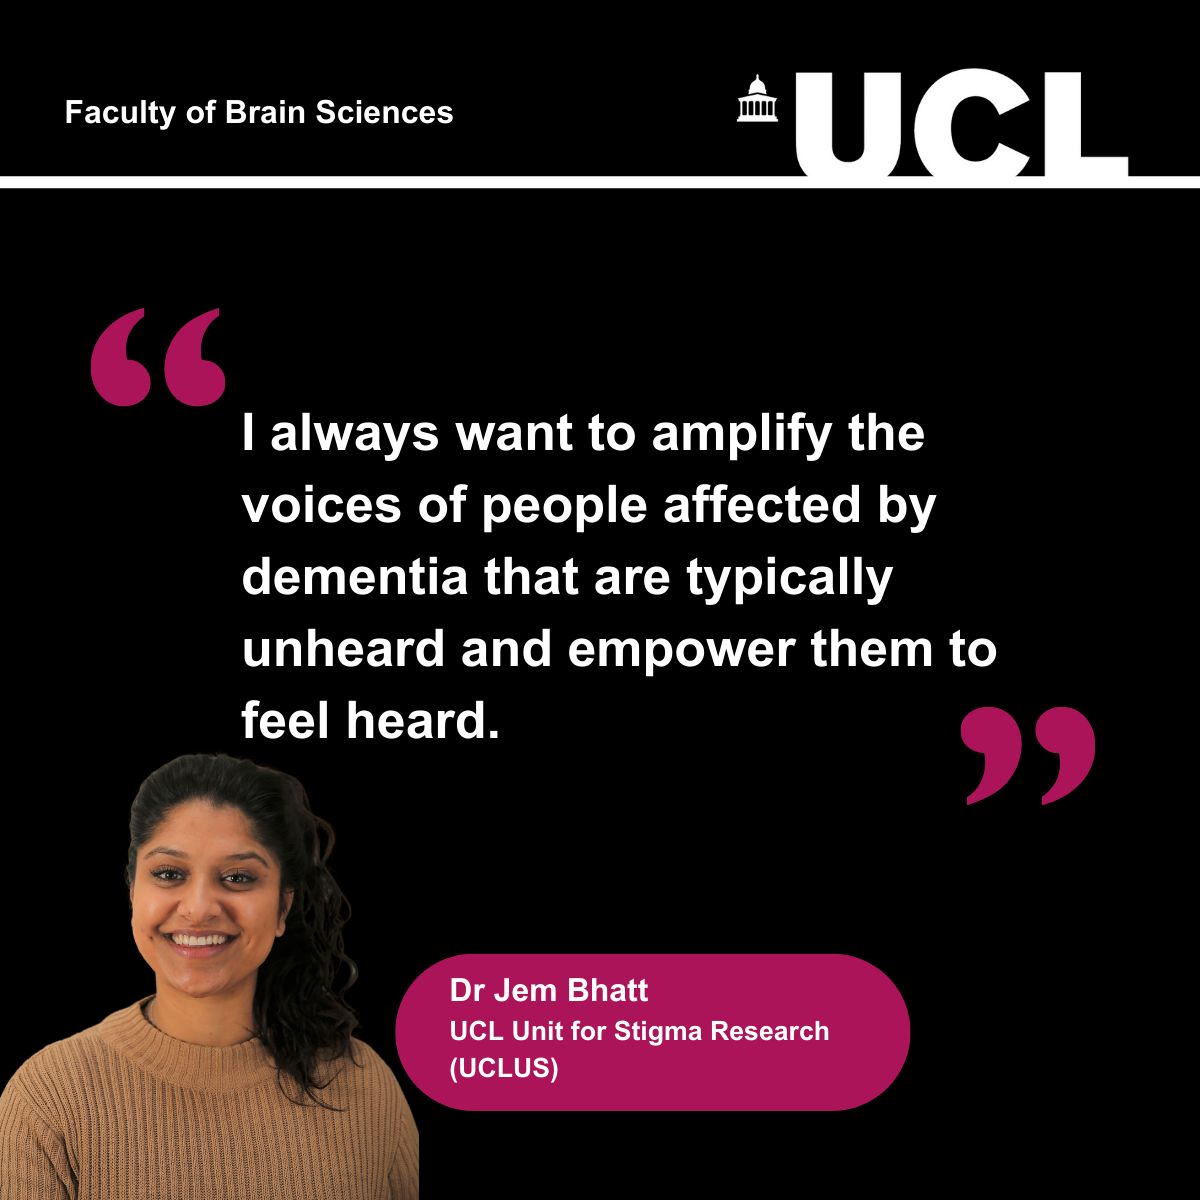 Dr Jem Bhatt from the @UCLPALS Unit for Stigma Research, conducts psychosocial dementia research, and investigates the discrimination faced by dementia carers. Find out more in this @UCLBrainScience interview👉 buff.ly/3KnGyKp